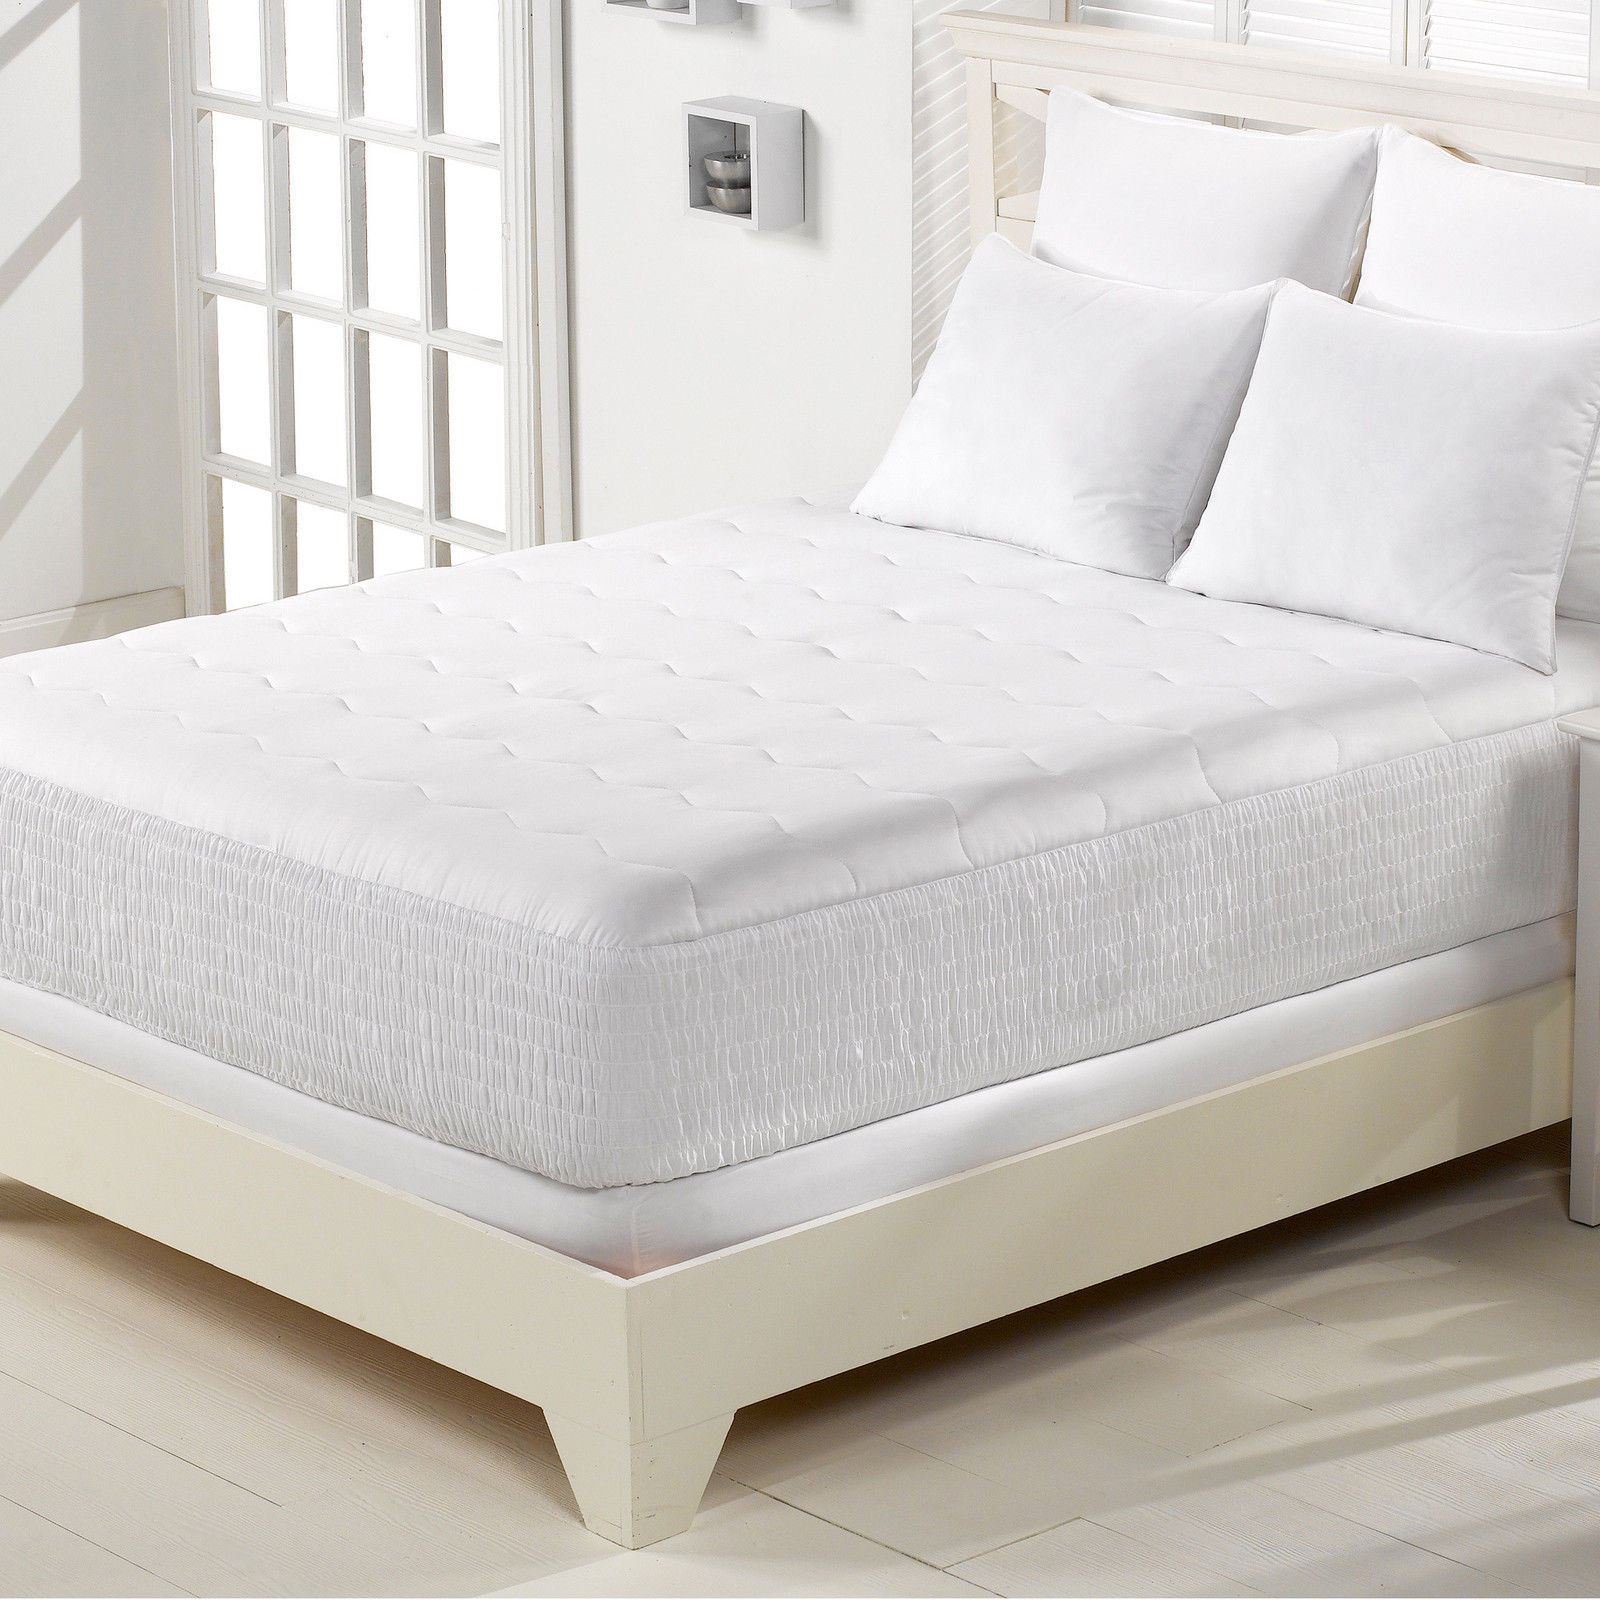 Eggshell Mattress Pad Cotton Top White Queen Size w/ Ribbed Sturdy Stay on Pads - $54.40